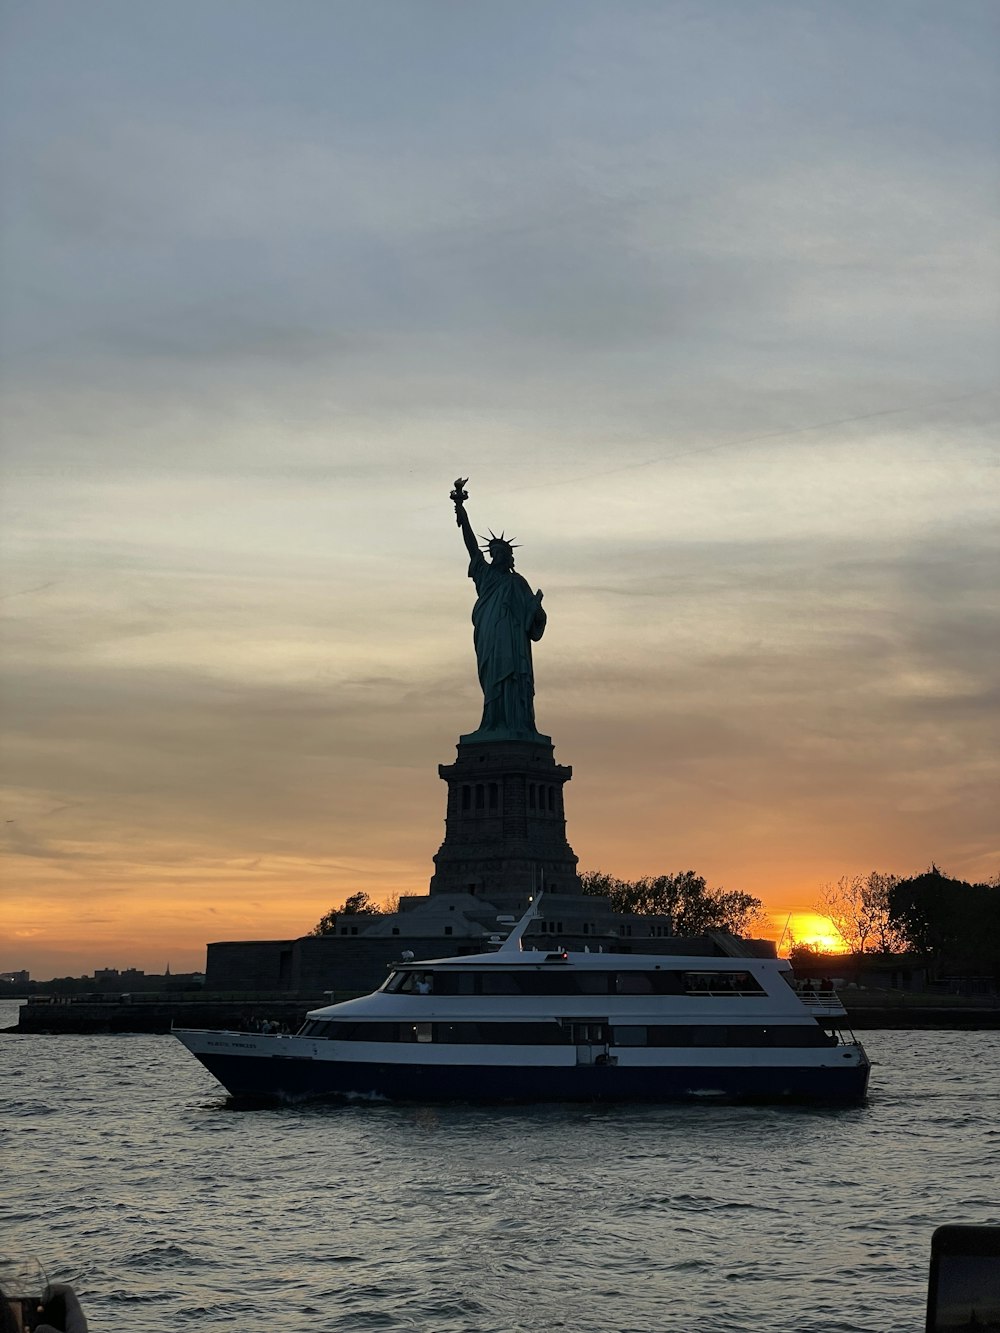 a boat in the water near a statue of liberty